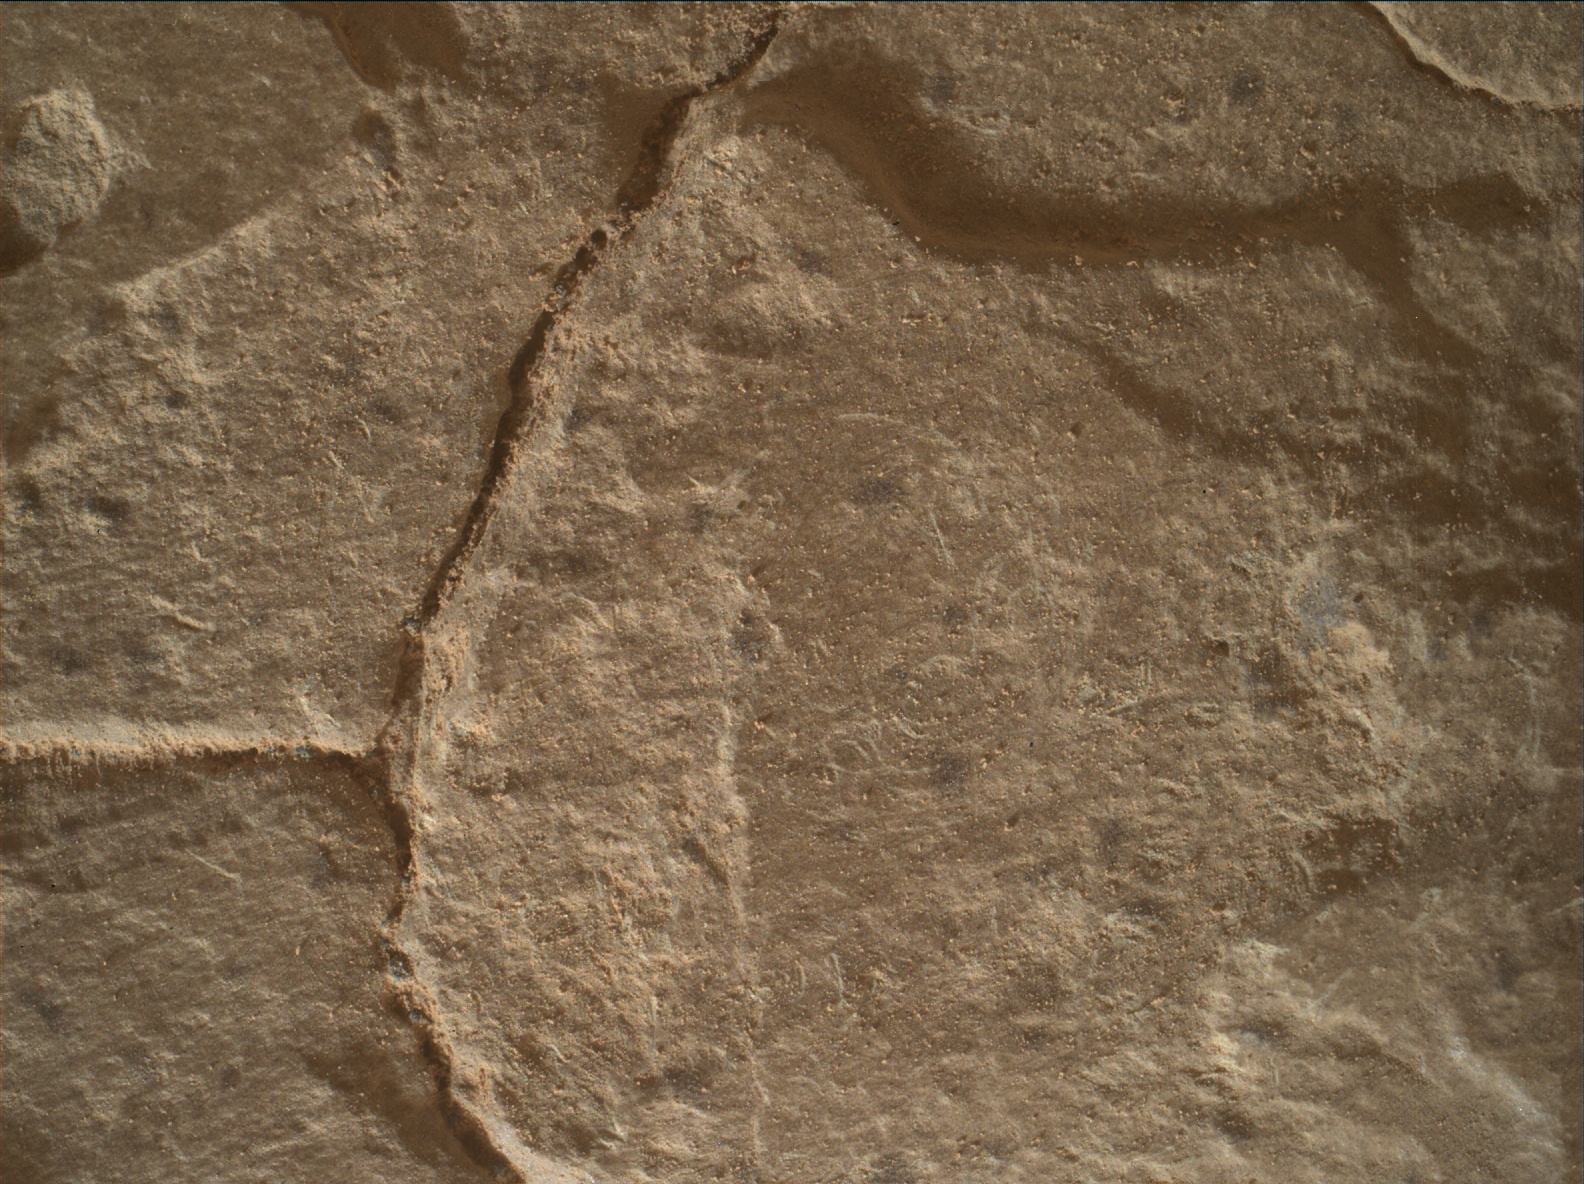 Nasa's Mars rover Curiosity acquired this image using its Mars Hand Lens Imager (MAHLI) on Sol 2833